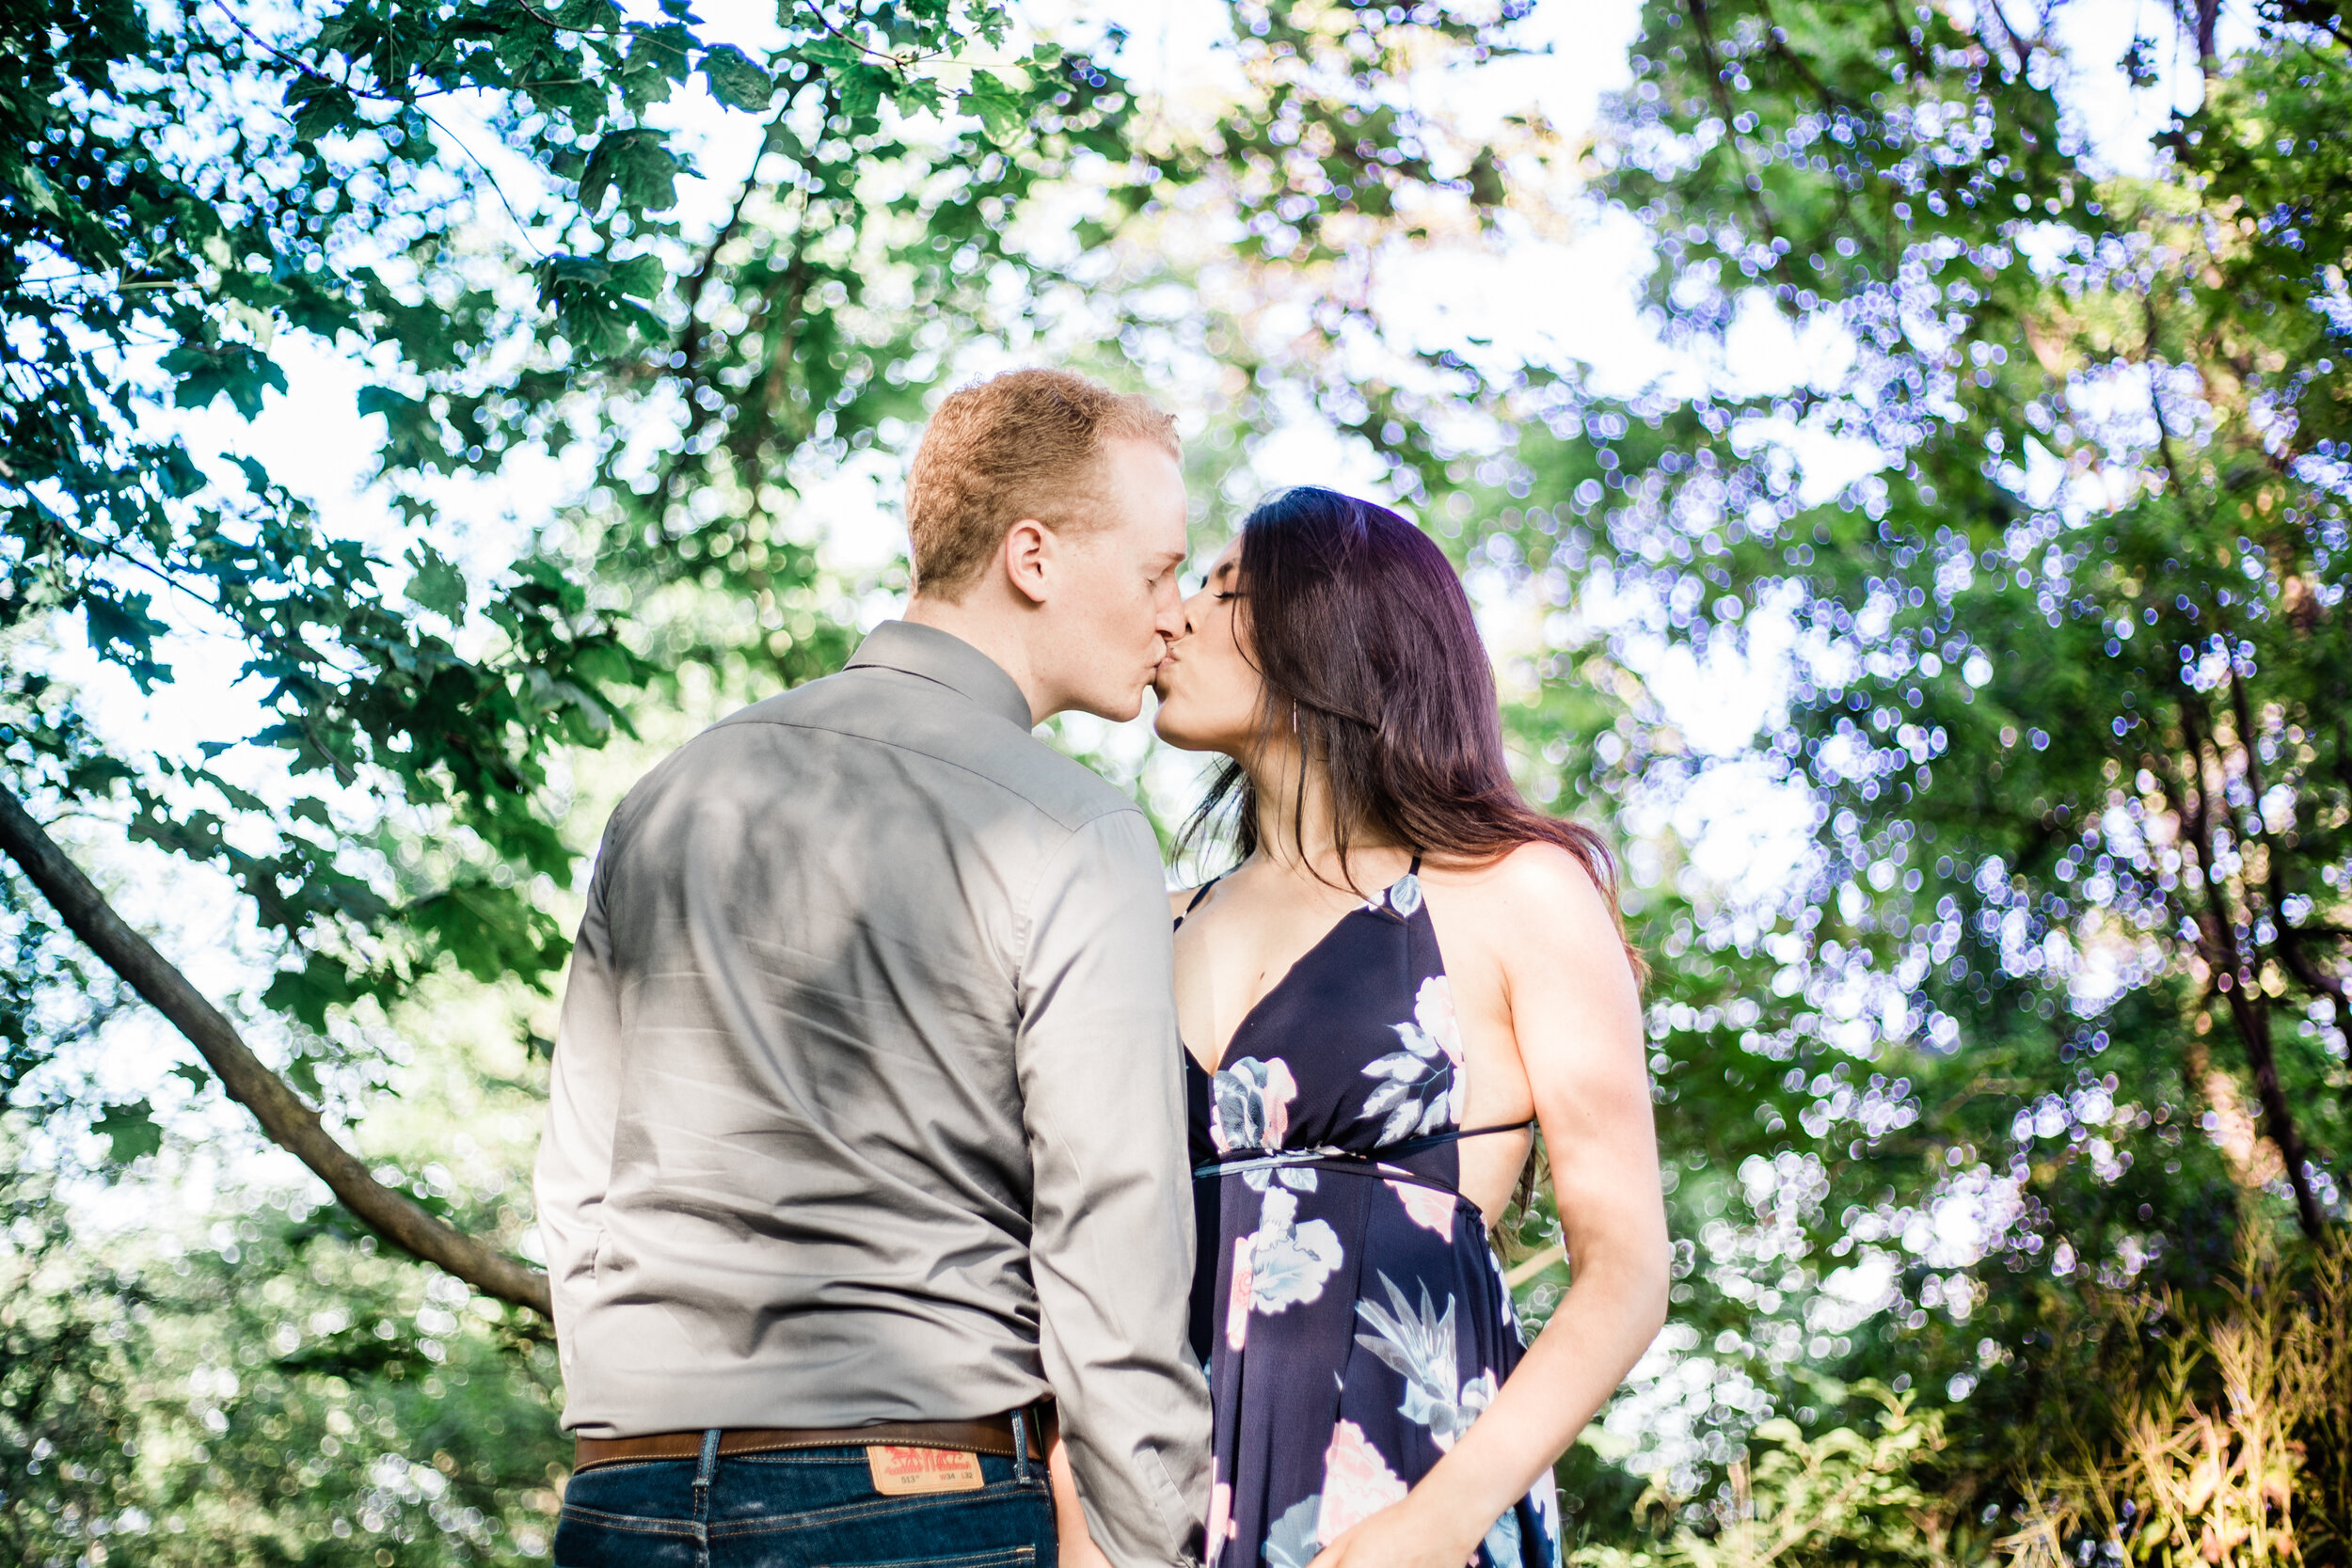 Engagement Session at High Rock Mountain in Western Maryland by Megapixels Media Photography best husband and wife wedding photographers-20.jpg